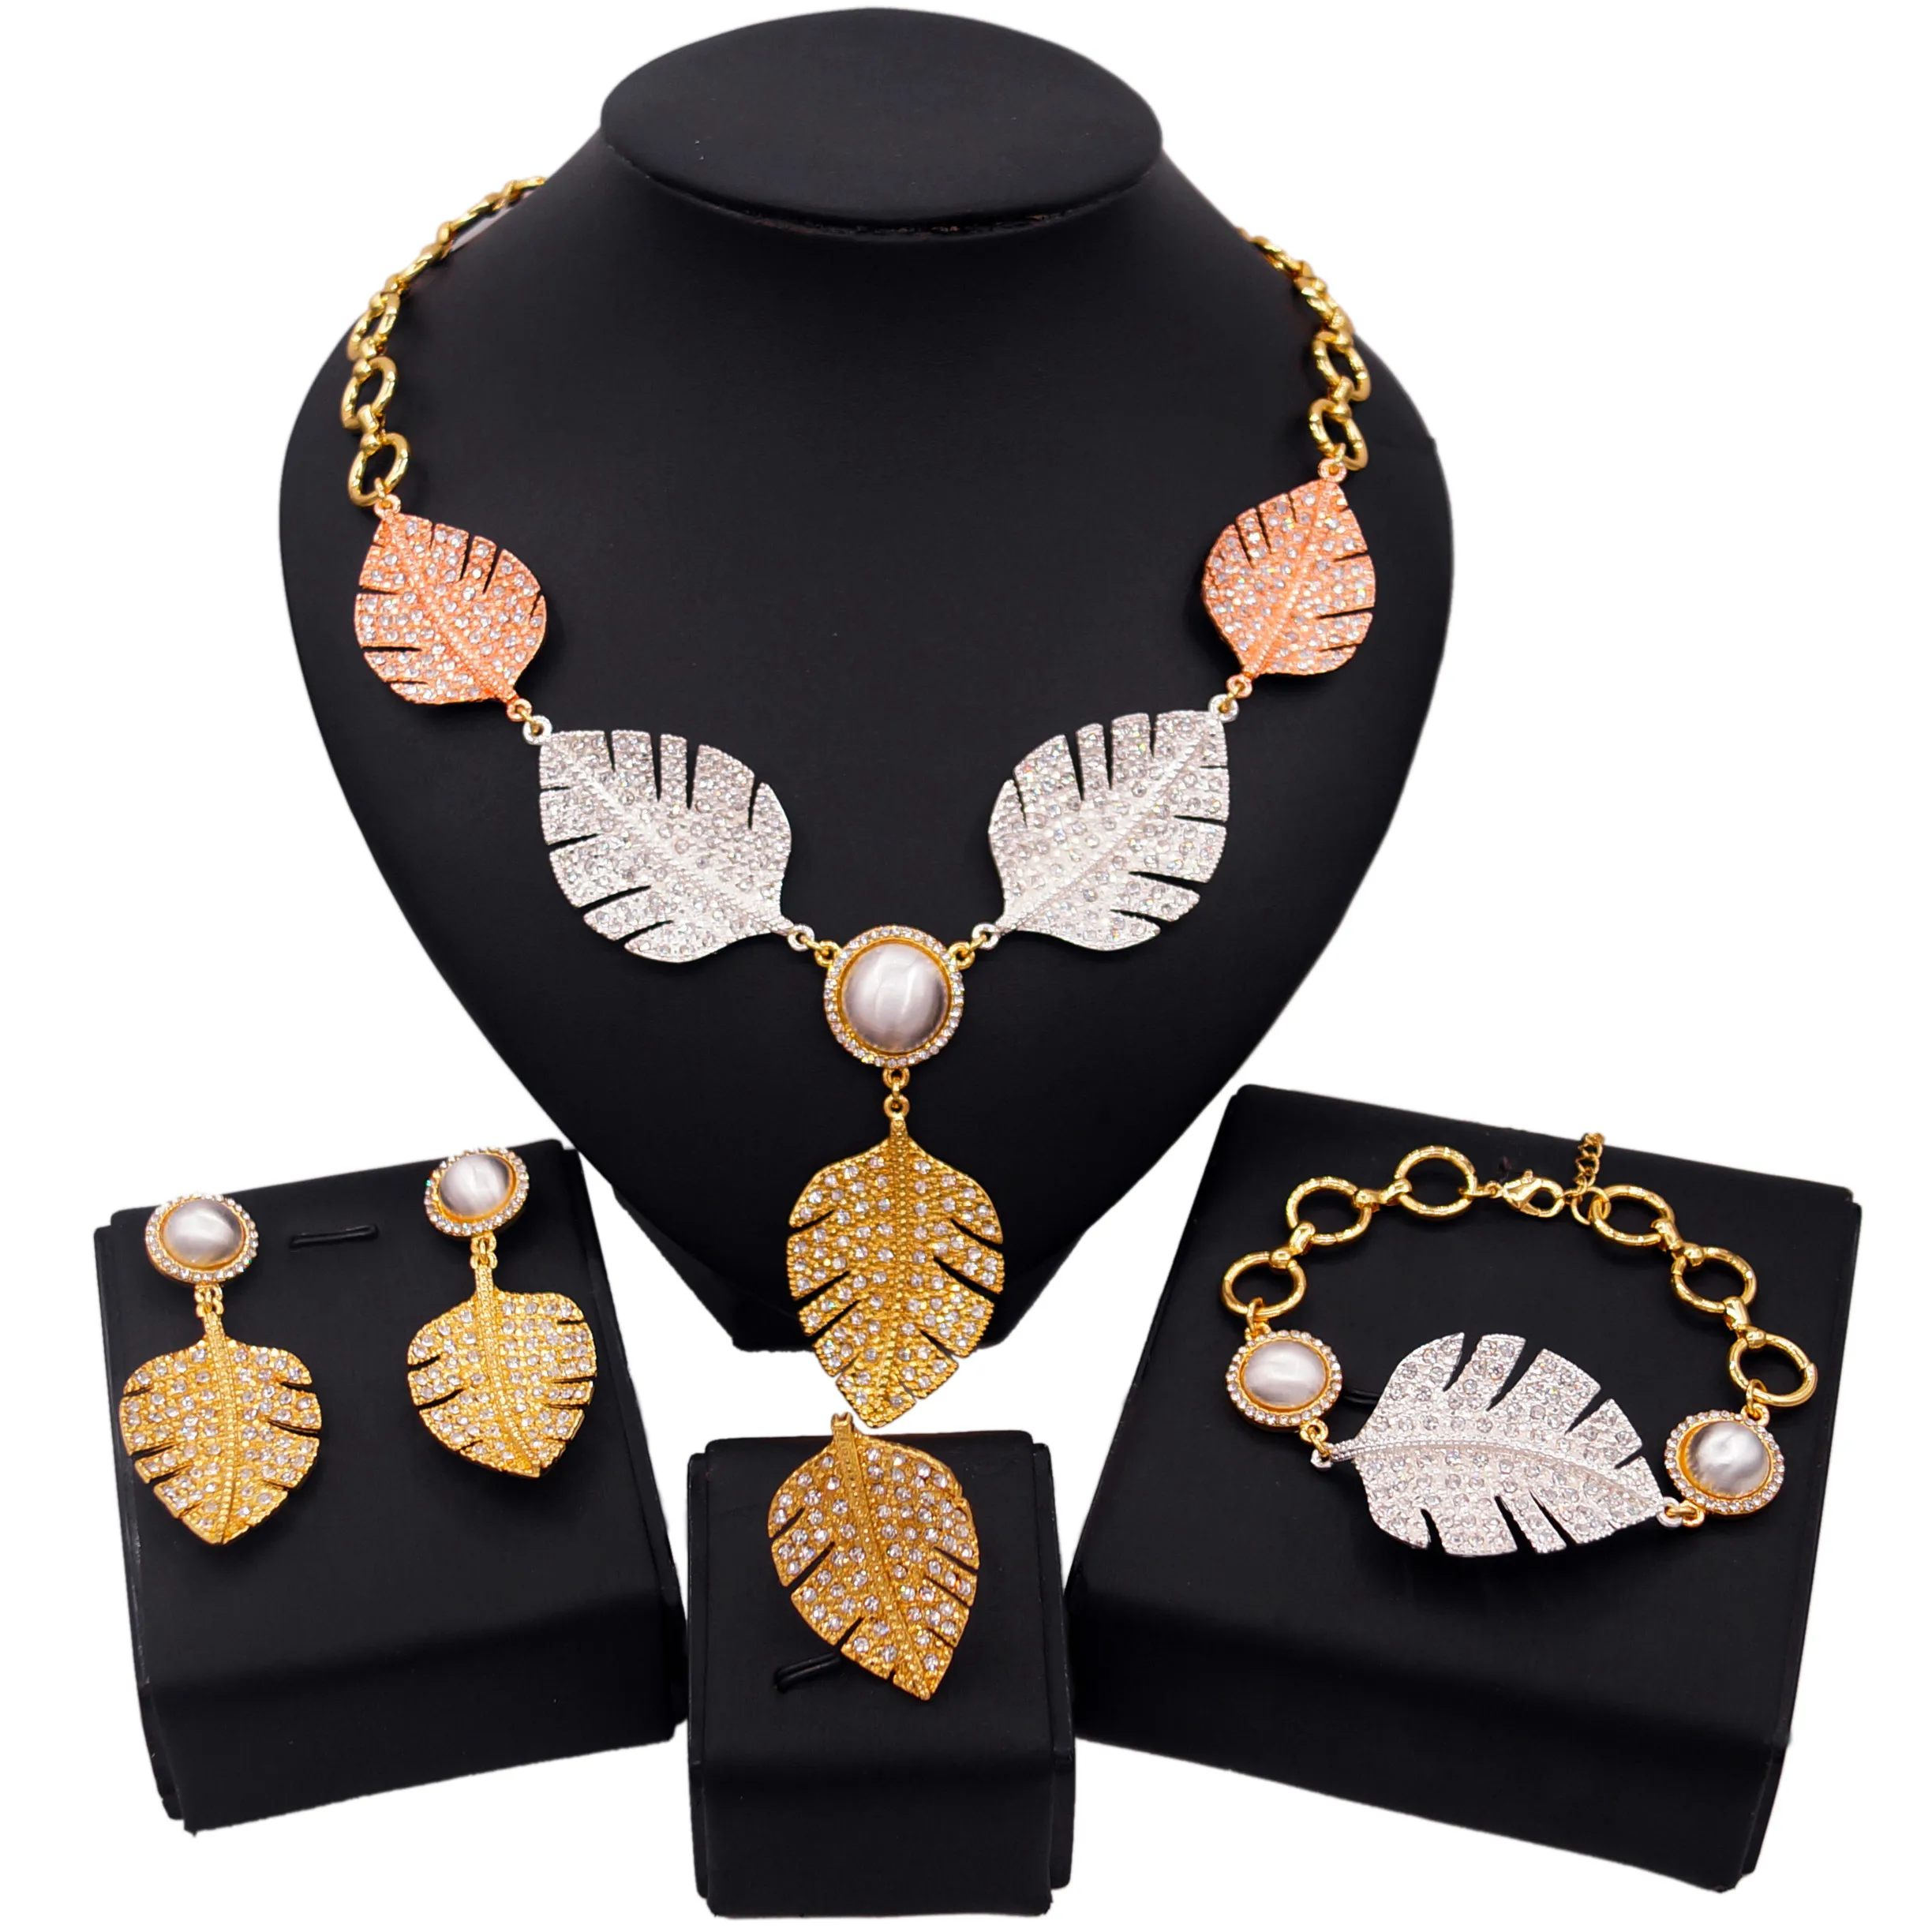 

Yulaili Latest Design Three Color Leaf Woman's Necklace Set Wedding Party Daily Wearing Gift Wholesale Hot Sale Jewellery Set